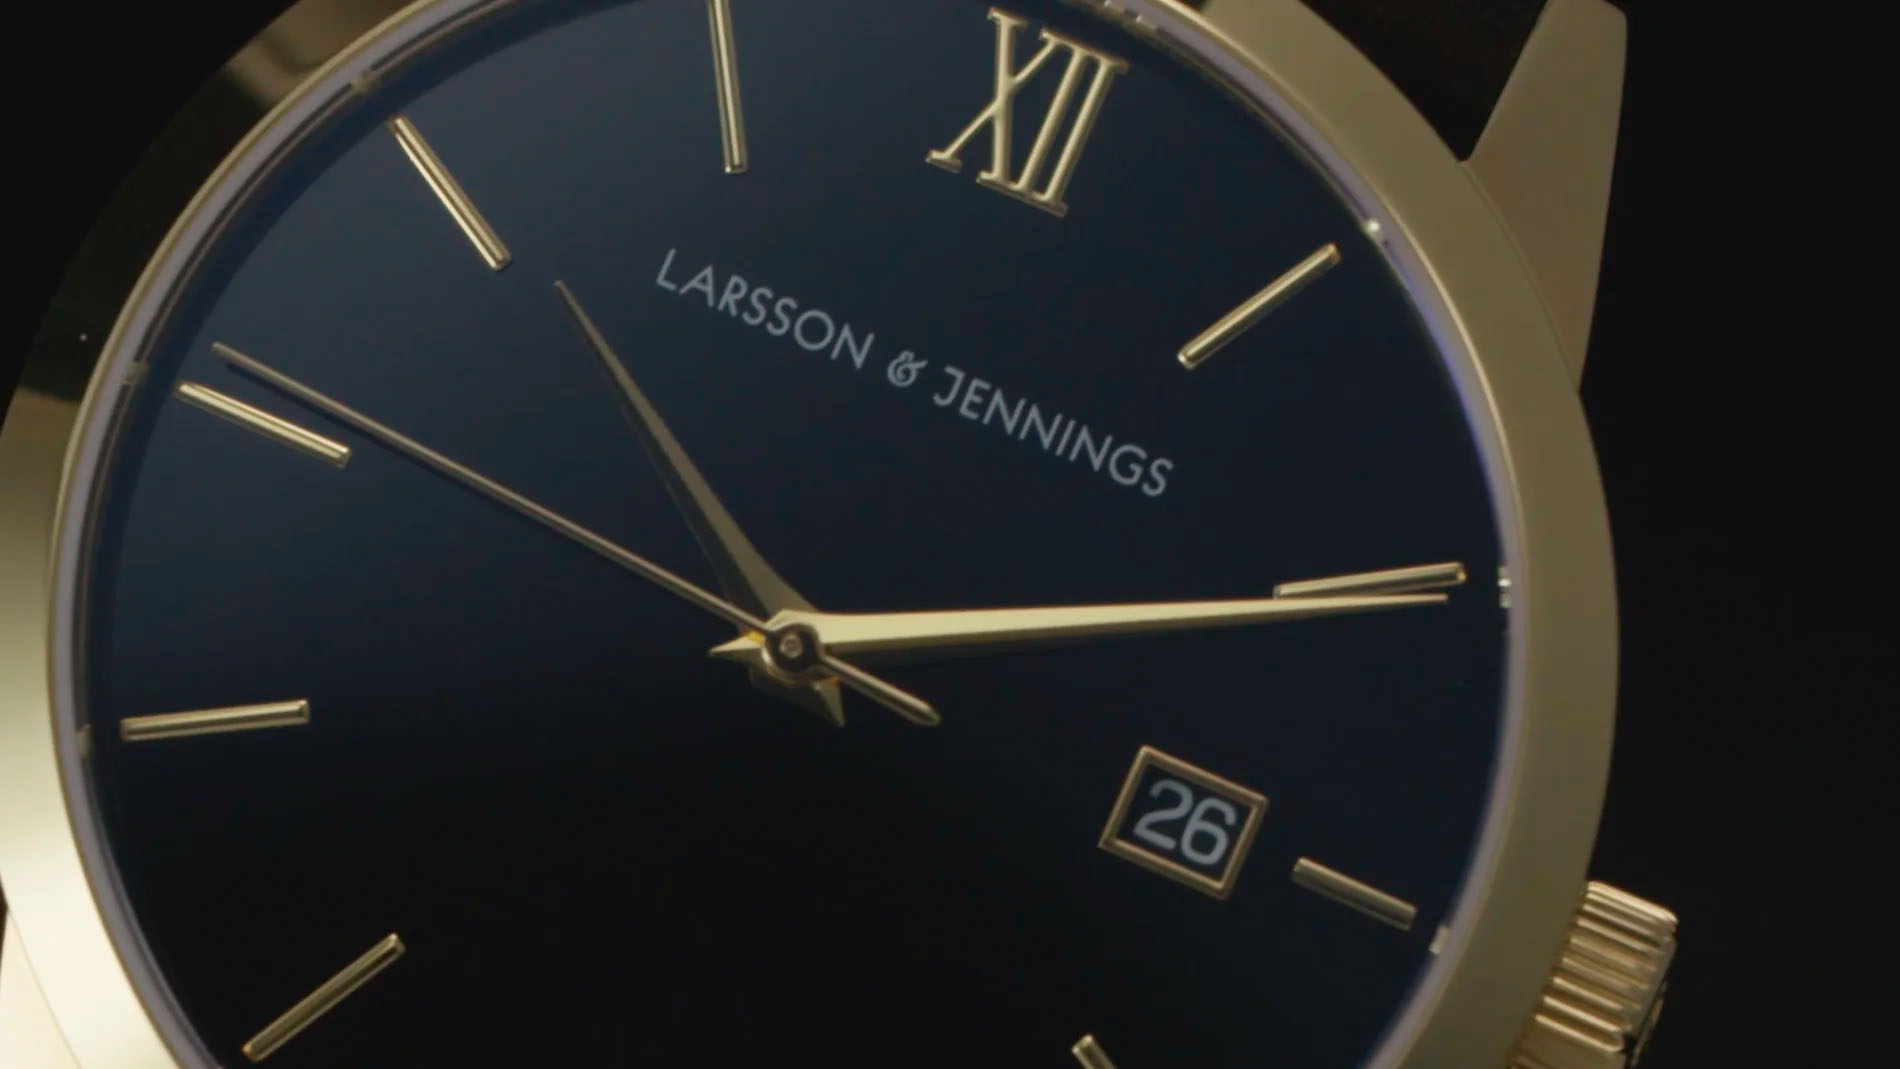 Advertising Product Film of Larsson & Jennings Automatic watches